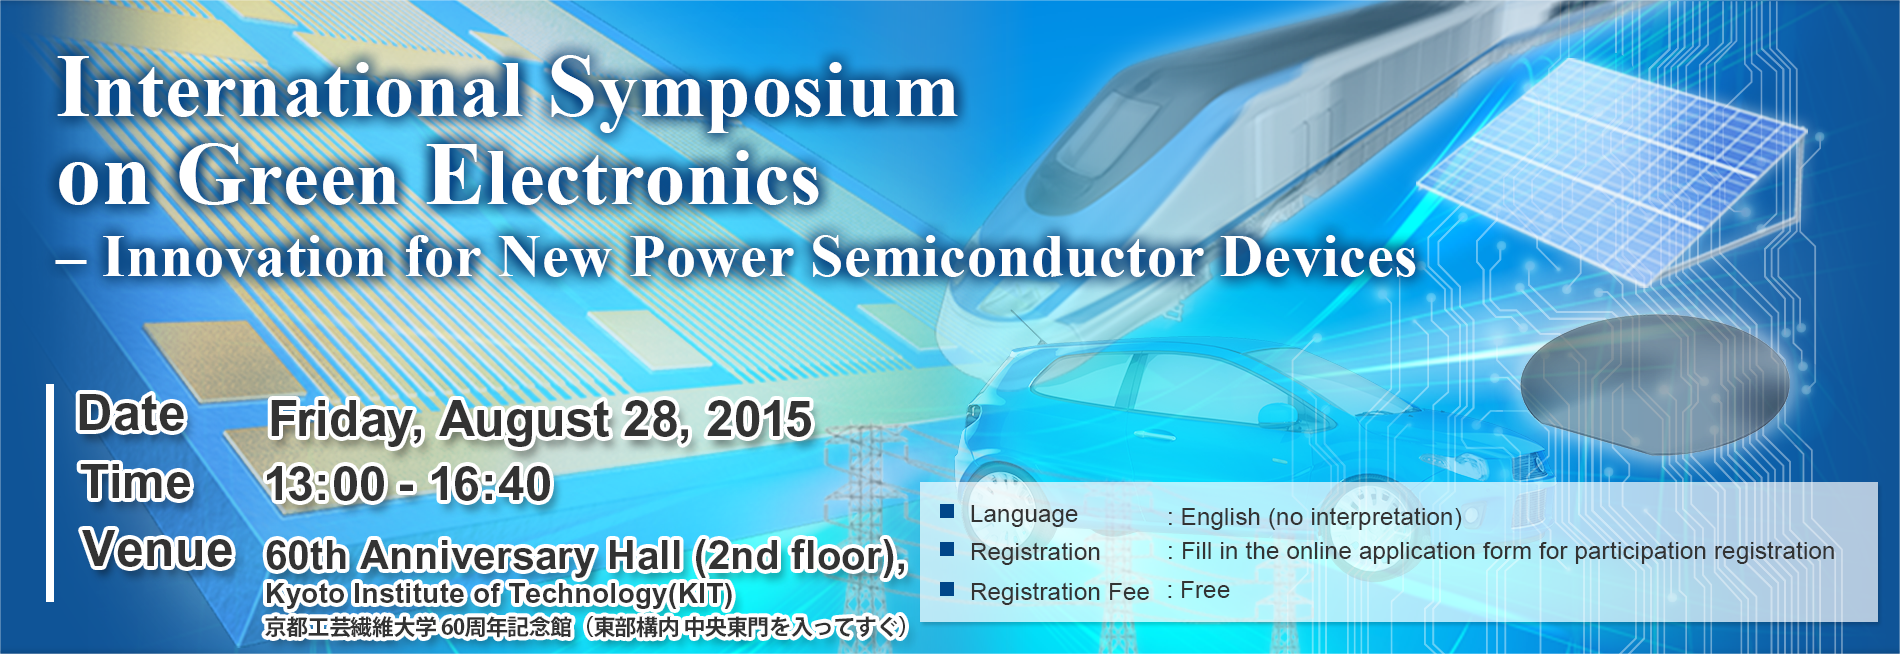 International Symposium on Green Electronics – Innovation for New Power Semiconductor Devices